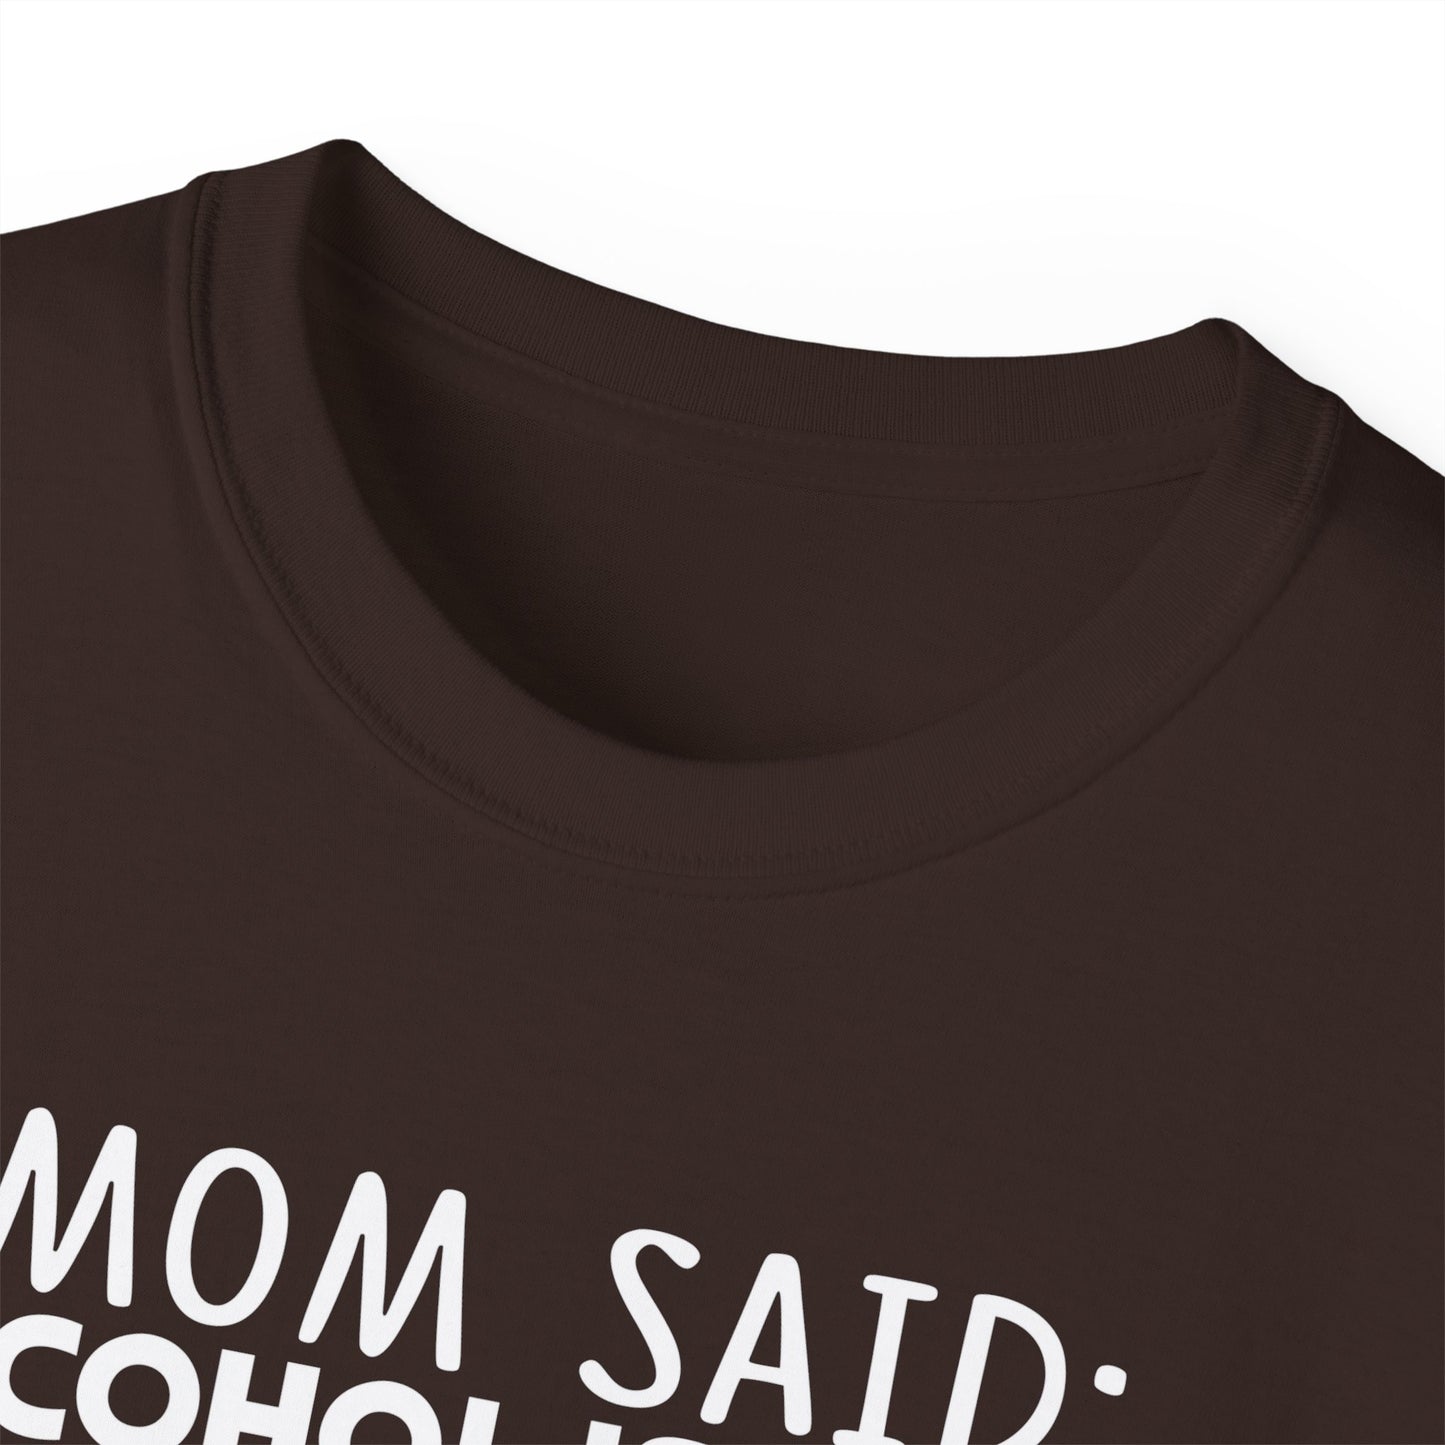 Mom Said Alcohol Is Your Enemy Jesus Said Love Your Enemy Case Closed Funny Unisex Christian Ultra Cotton Tee Printify